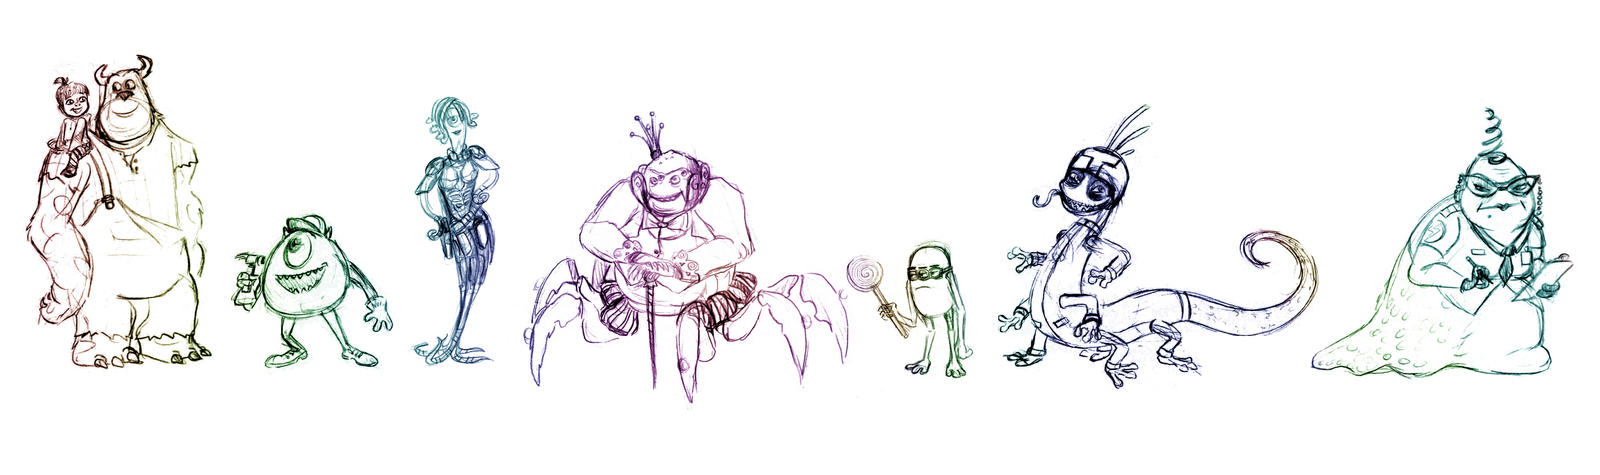 Monsters inc. Wreck it ralph style WIP